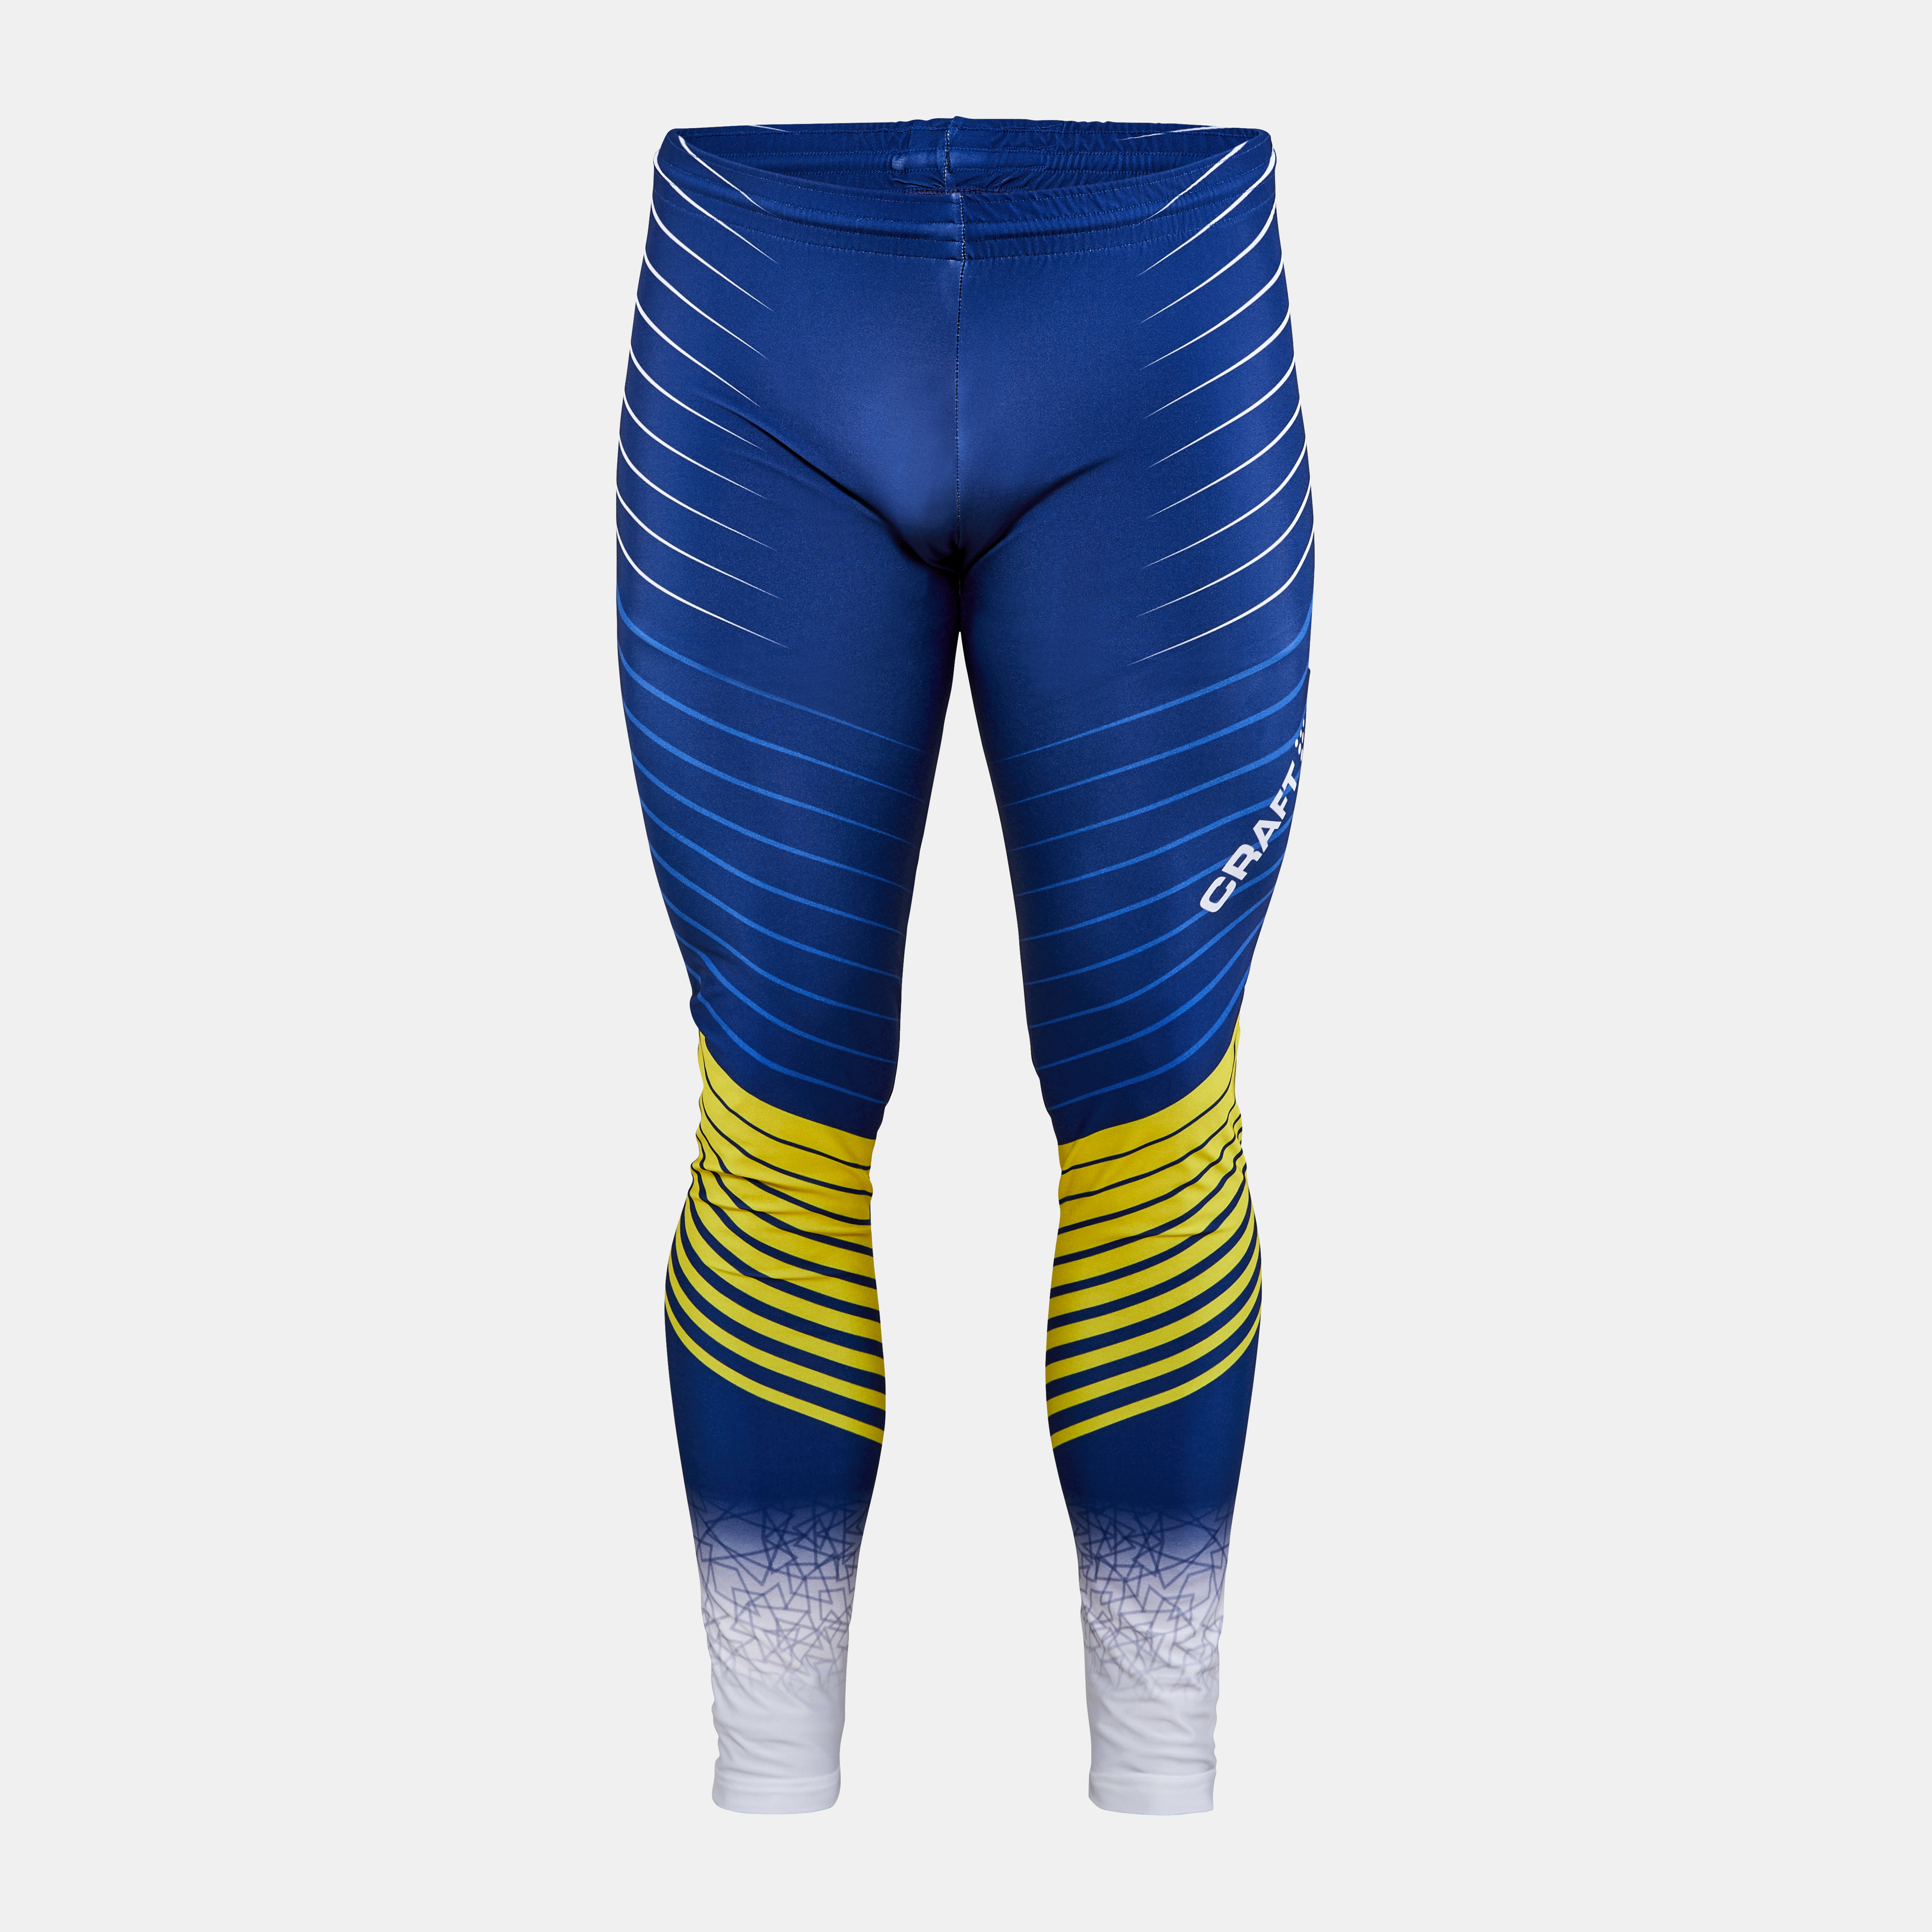 https://craft-products-production.imgix.net/images/141_f05f17fa45-1908367-900391_ski-team-race-tights-u_front-original.jpg